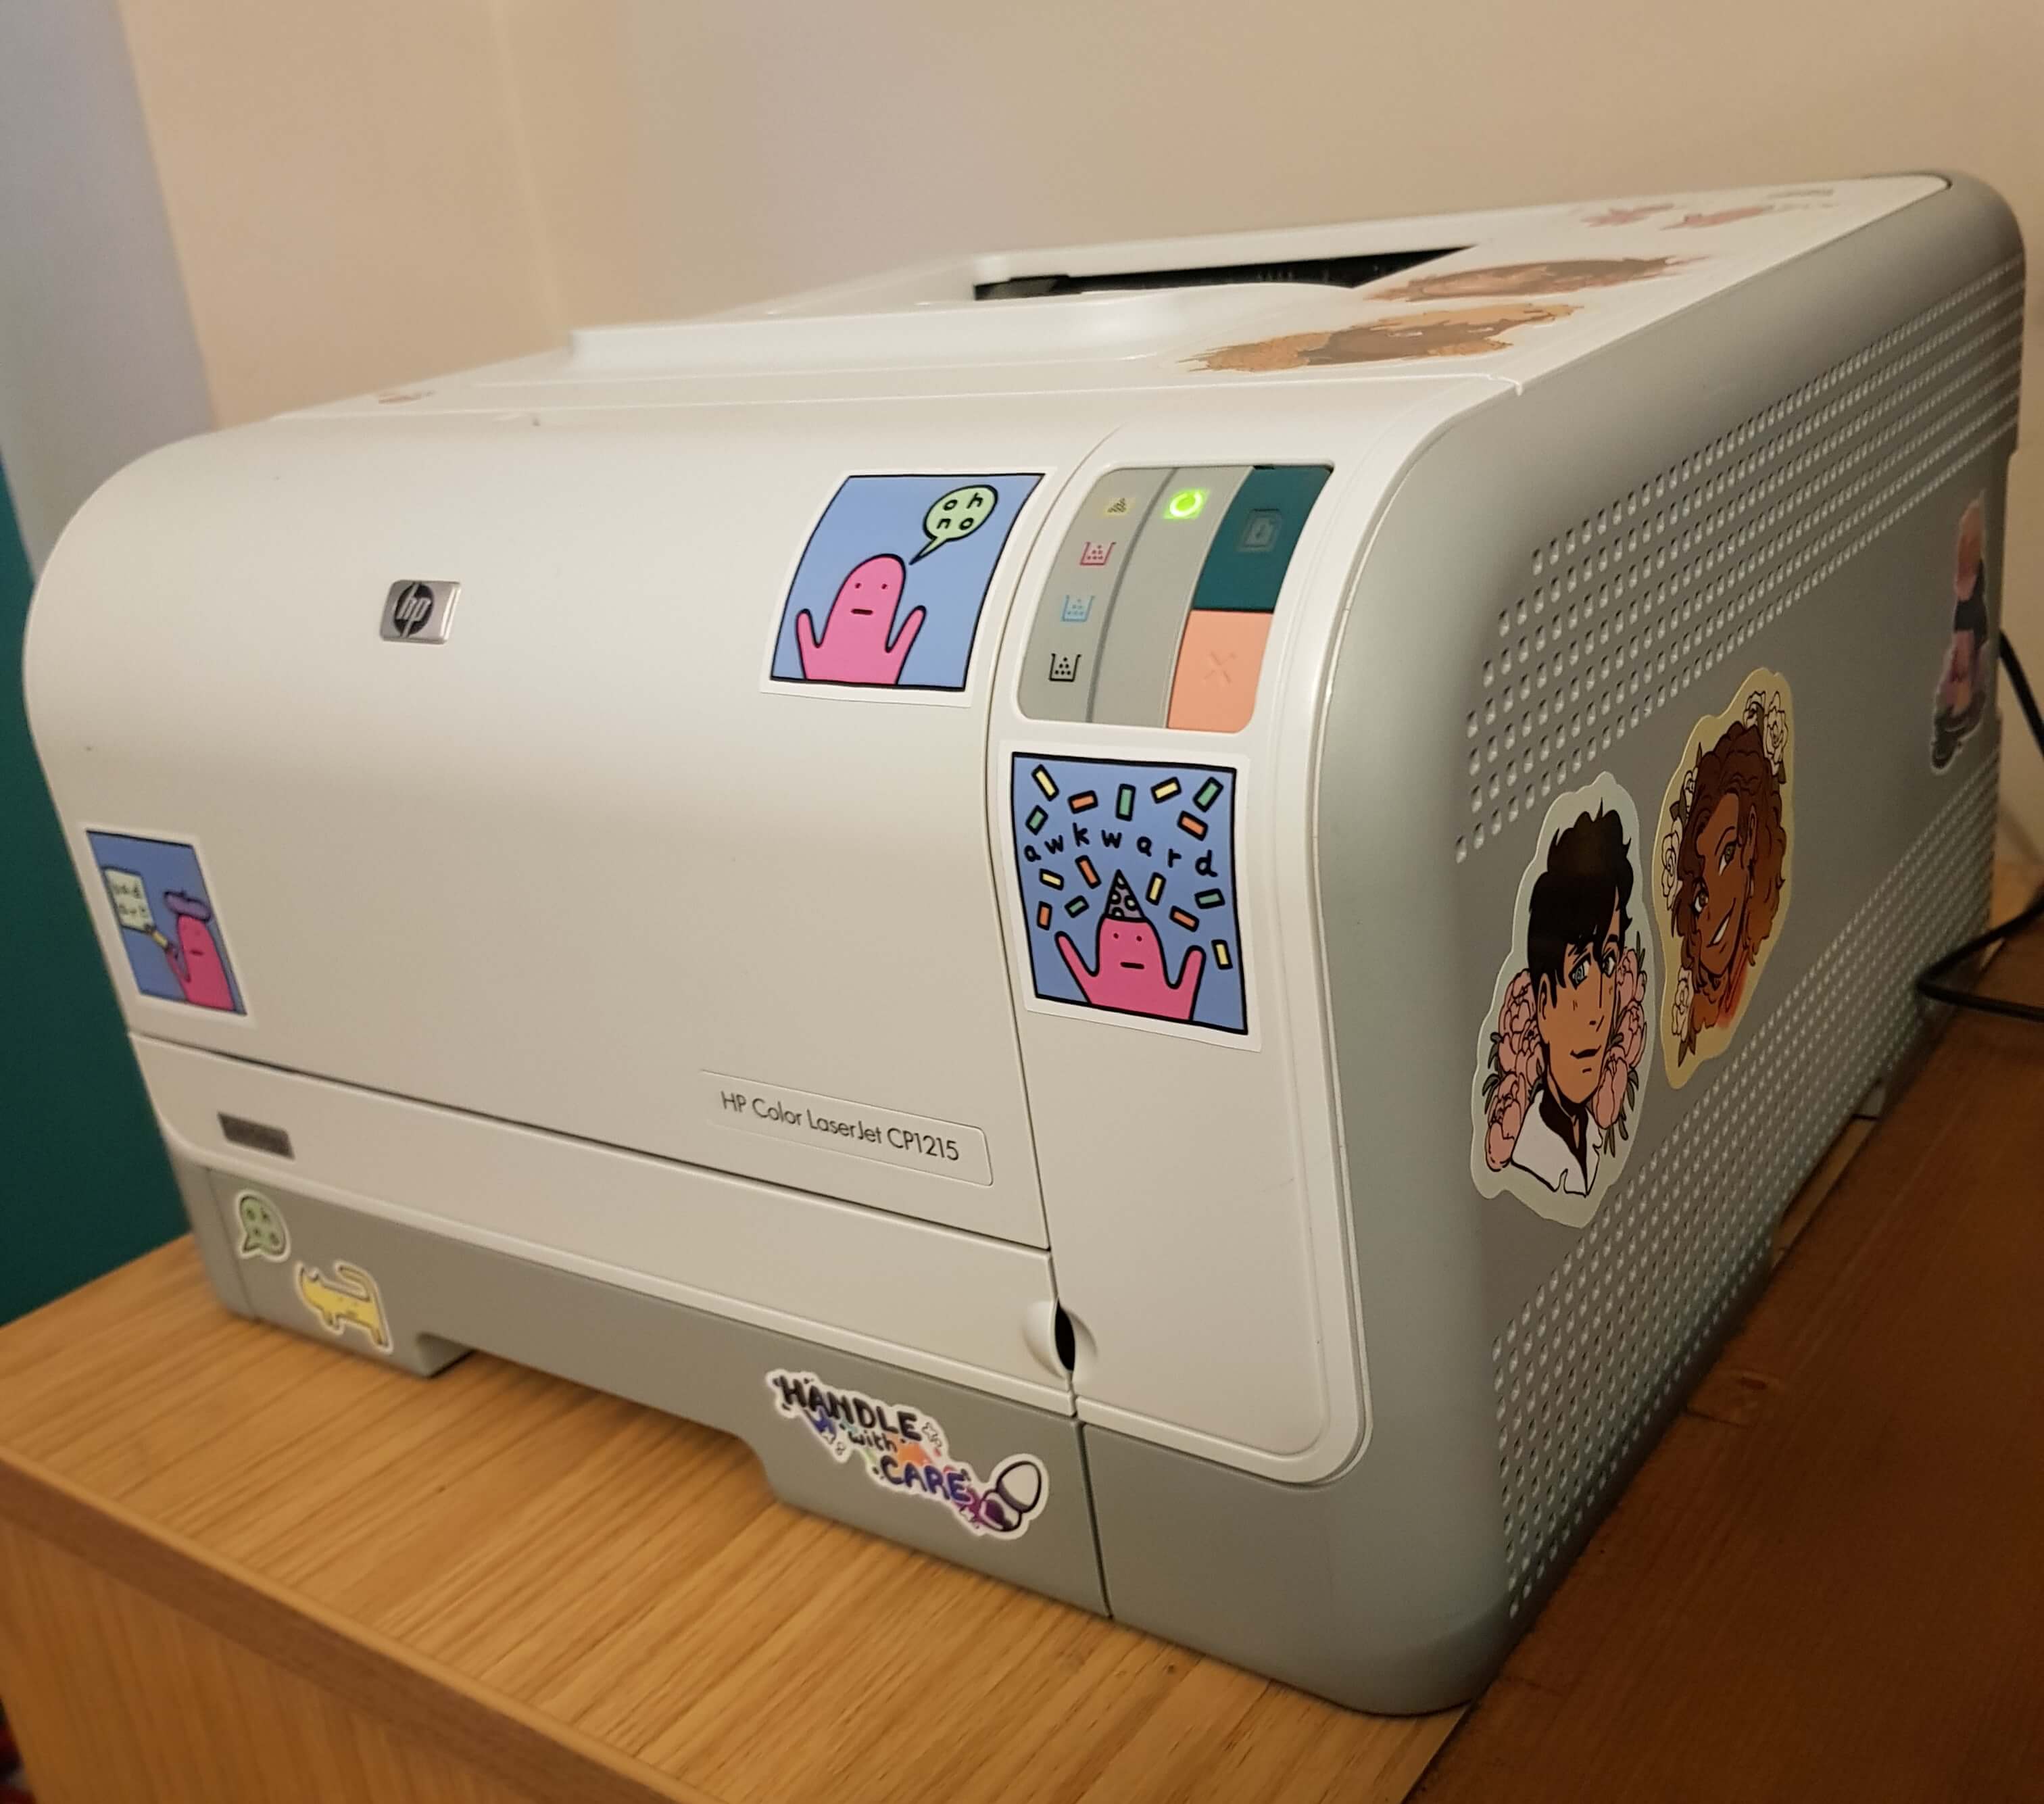 a photo of a little grey laser printer, decorated with colourful stickers